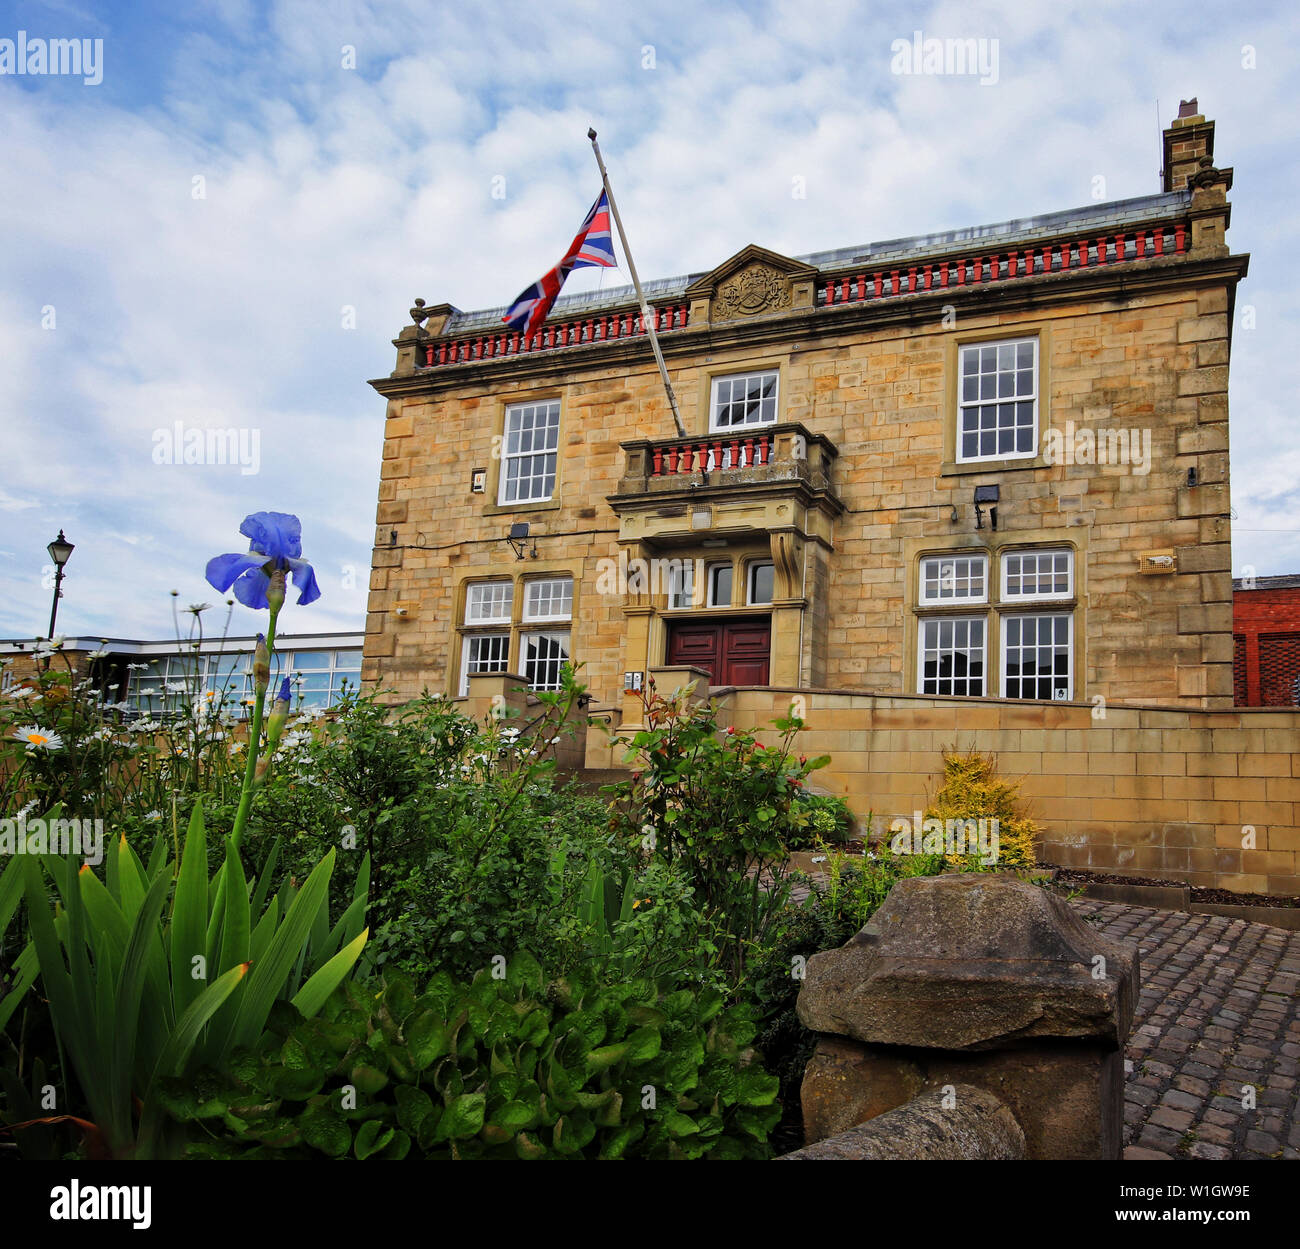 Brierfield Town Hall, viewed from the roadside flower bed Stock Photo